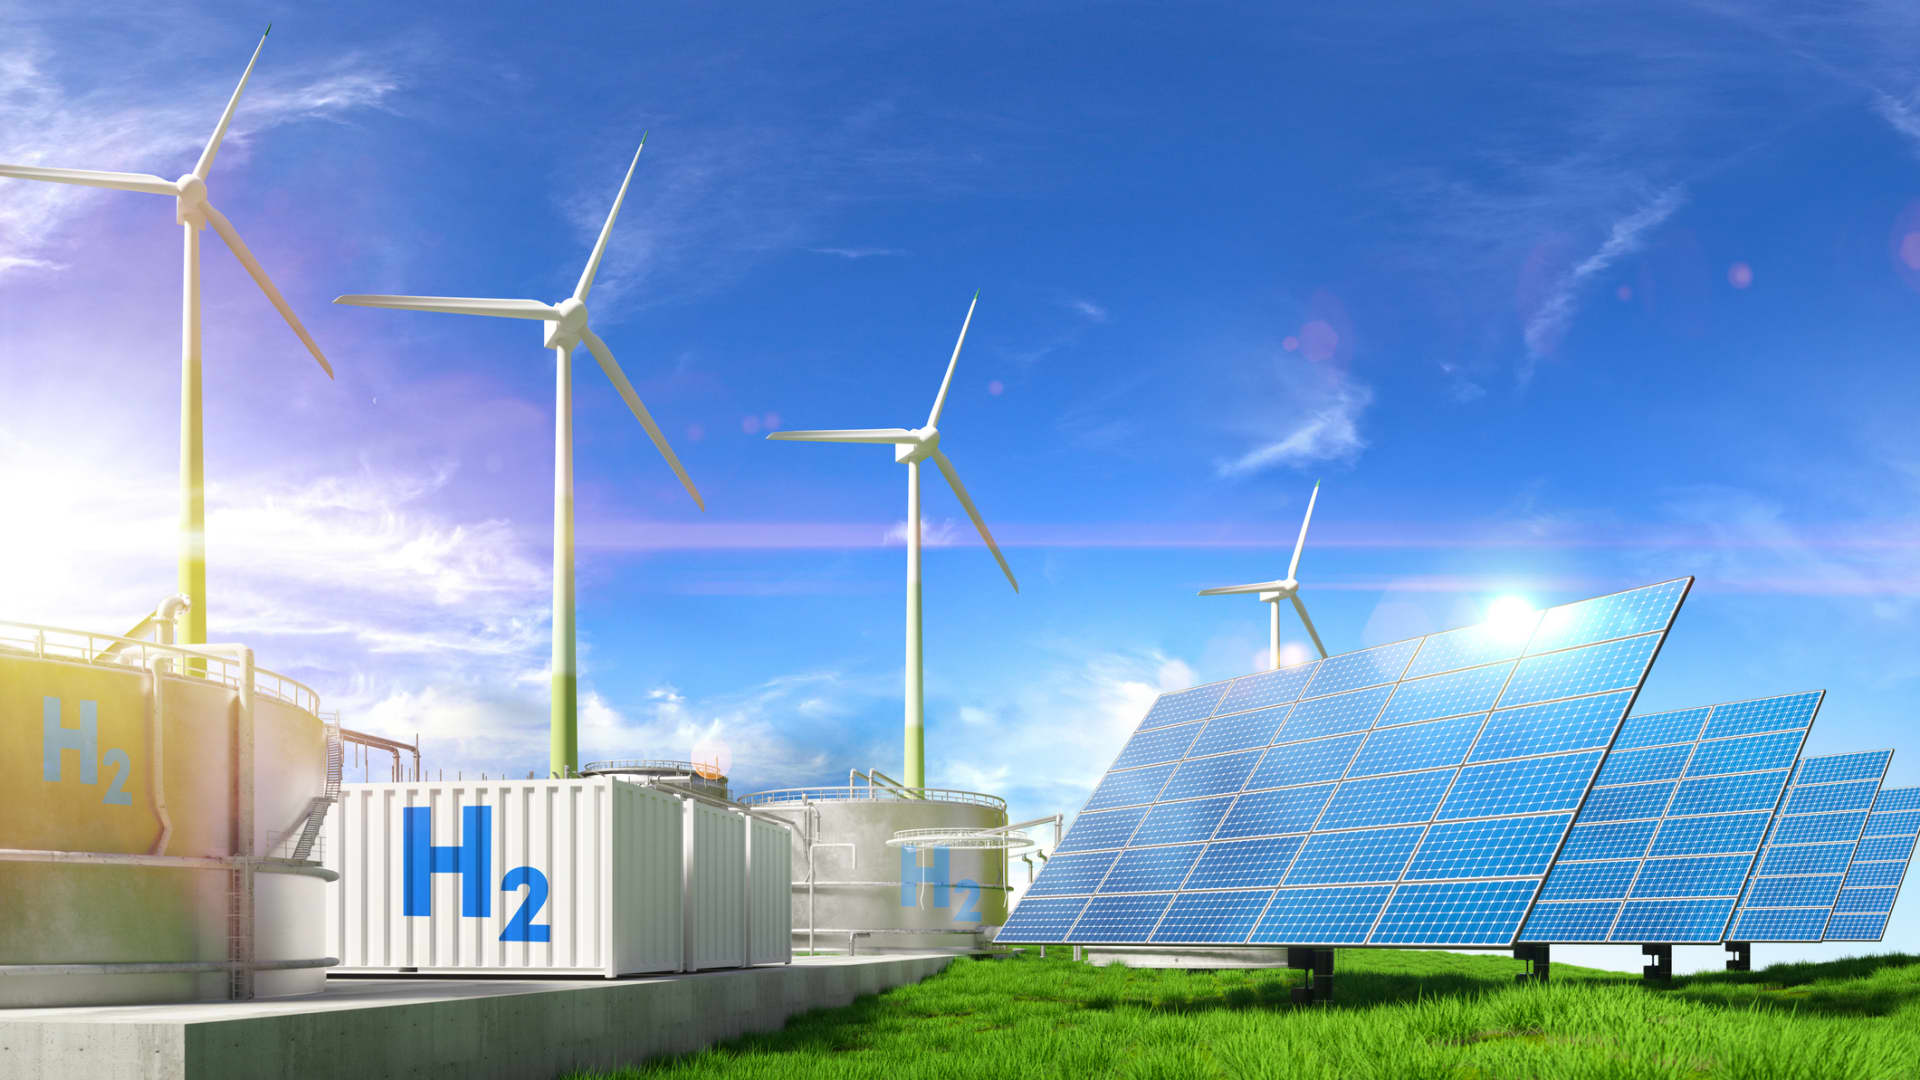 Digital generated image of wind turbines, solar panels and Hydrogen containers standing on landscape against blue sky.